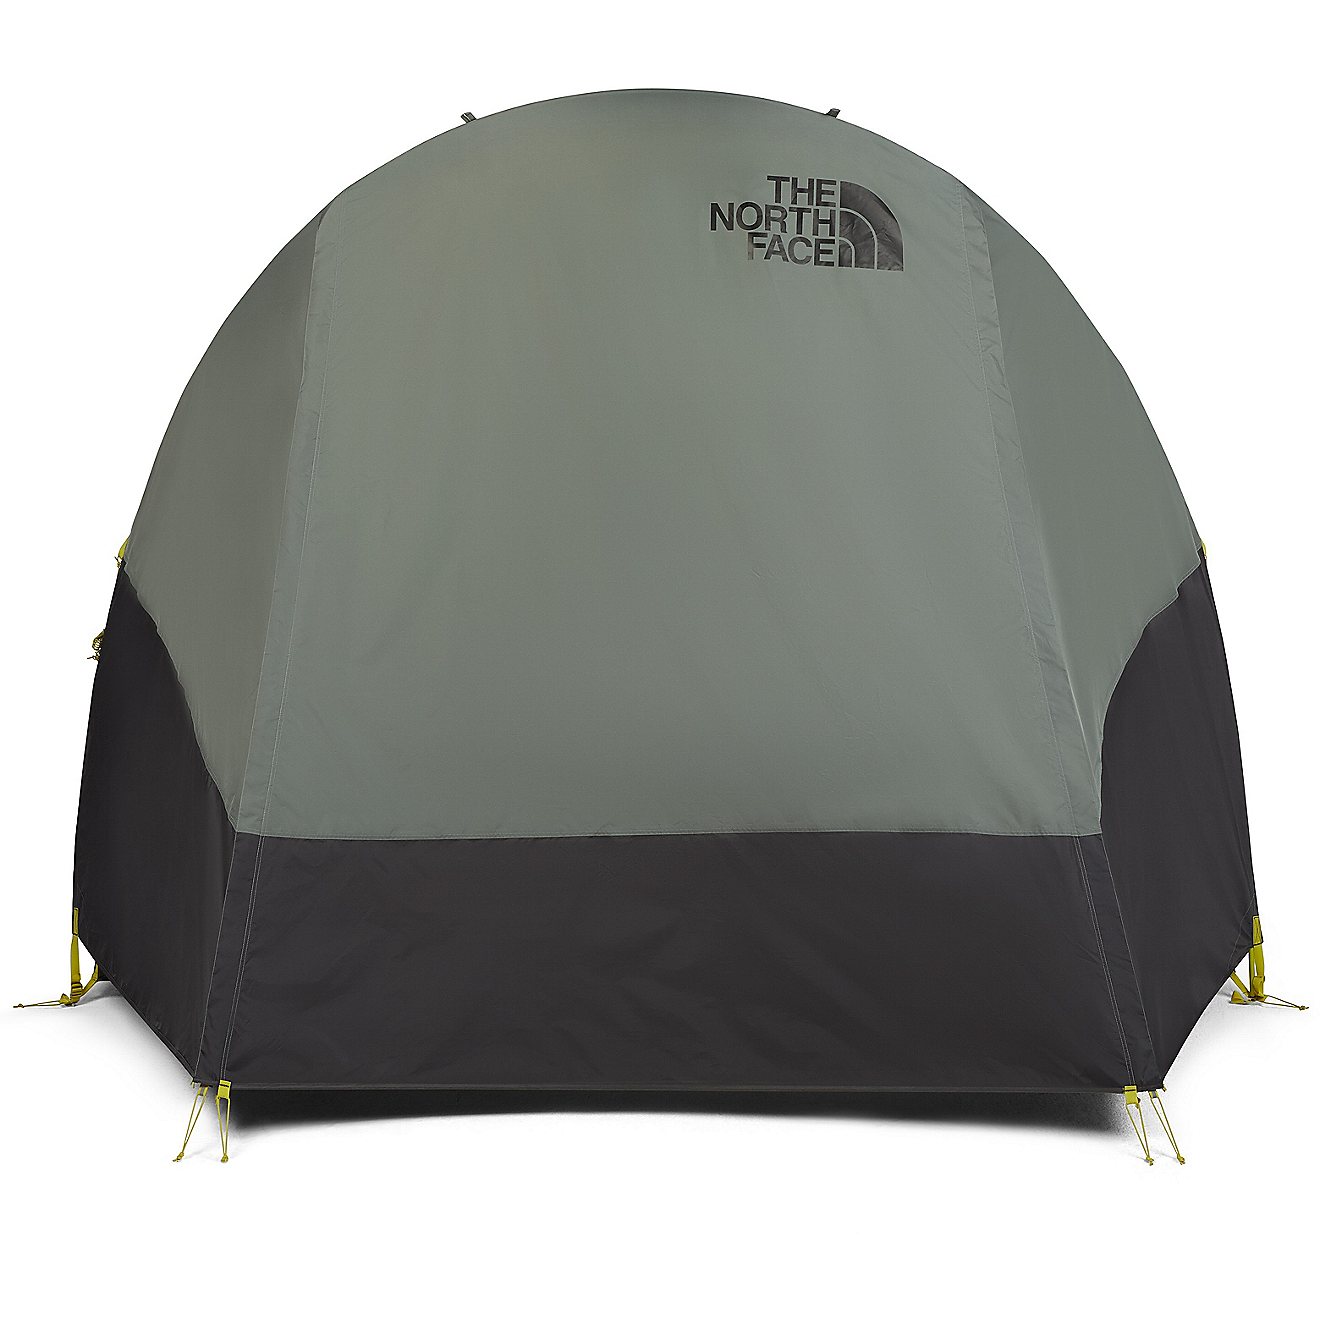 The North Face Wawona 4 Person Dome Tent                                                                                         - view number 7